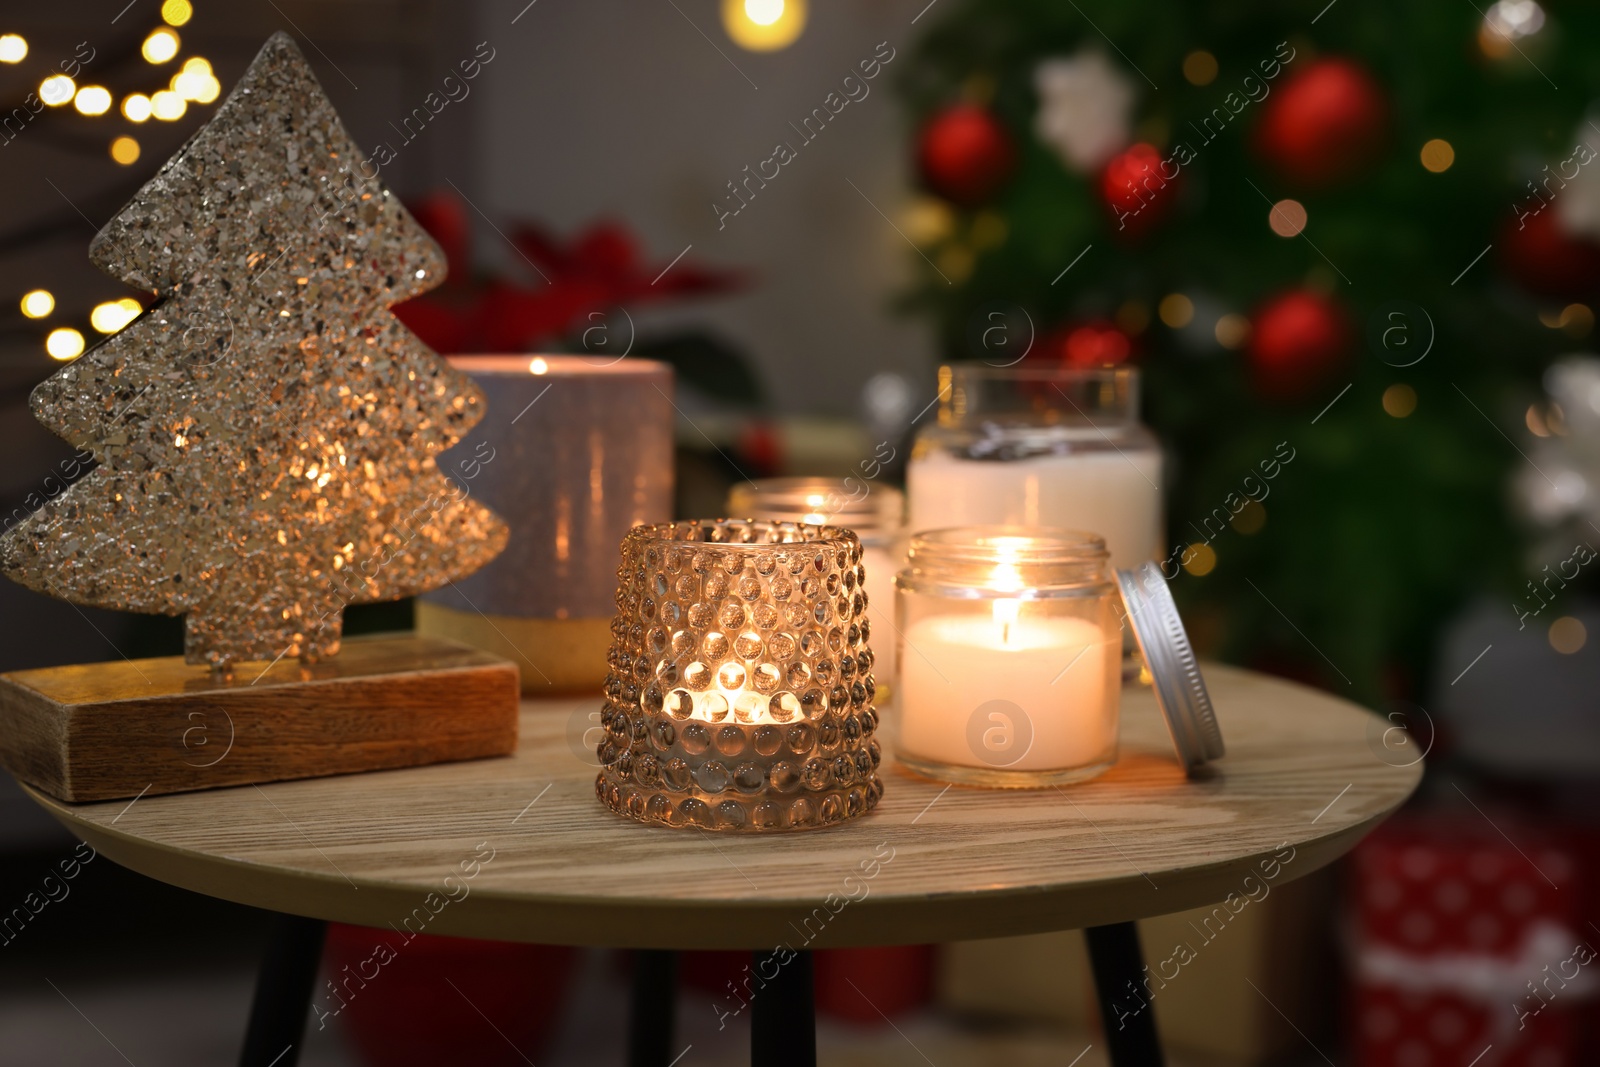 Photo of Burning candles on wooden table in room decorated for Christmas